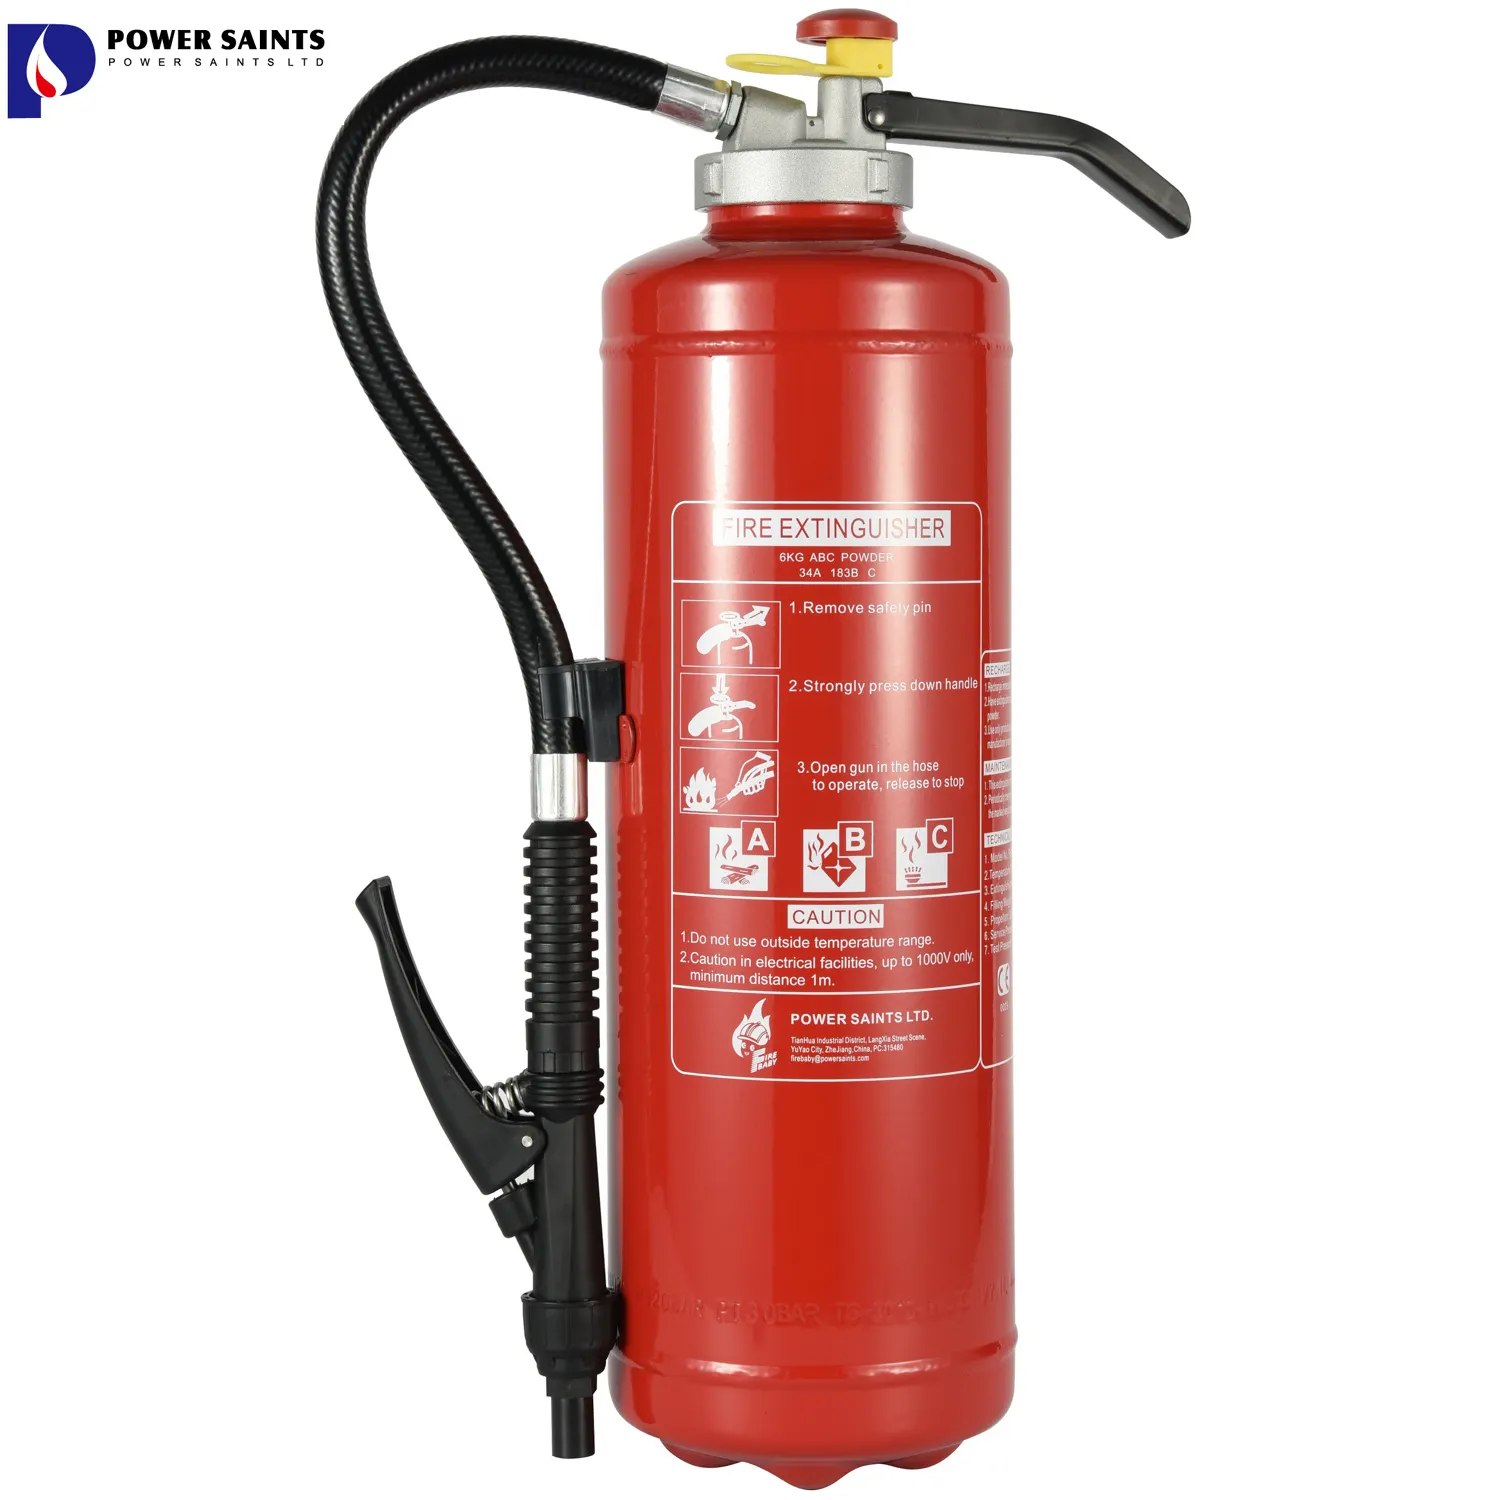 New Type ABC Dry Chemical Powder Fire Extinguisher